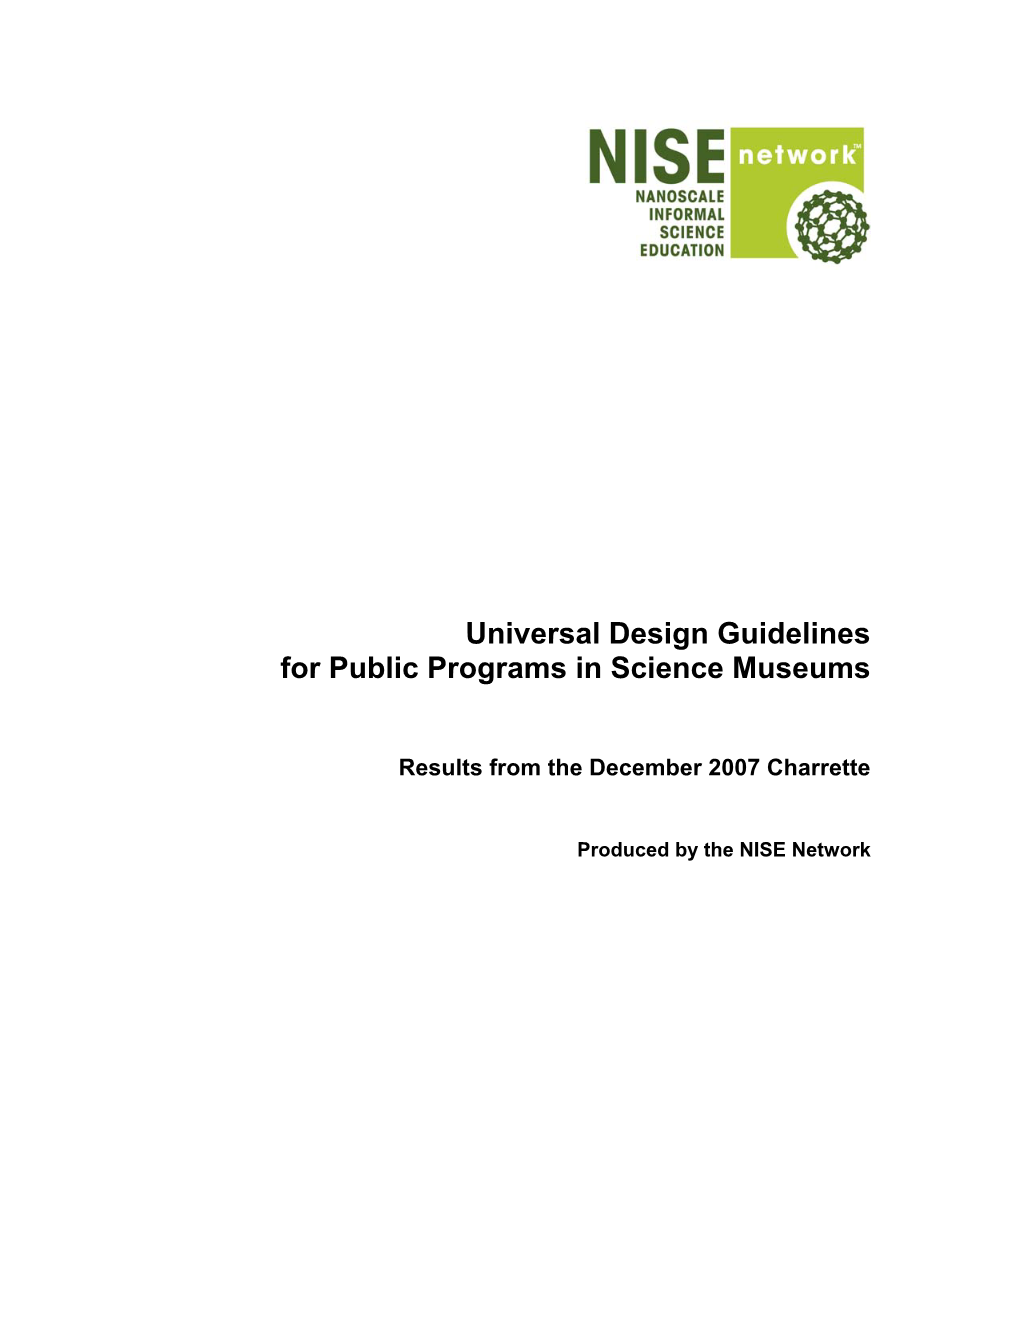 Universal Design Guidelines for Public Programs in Science Museums